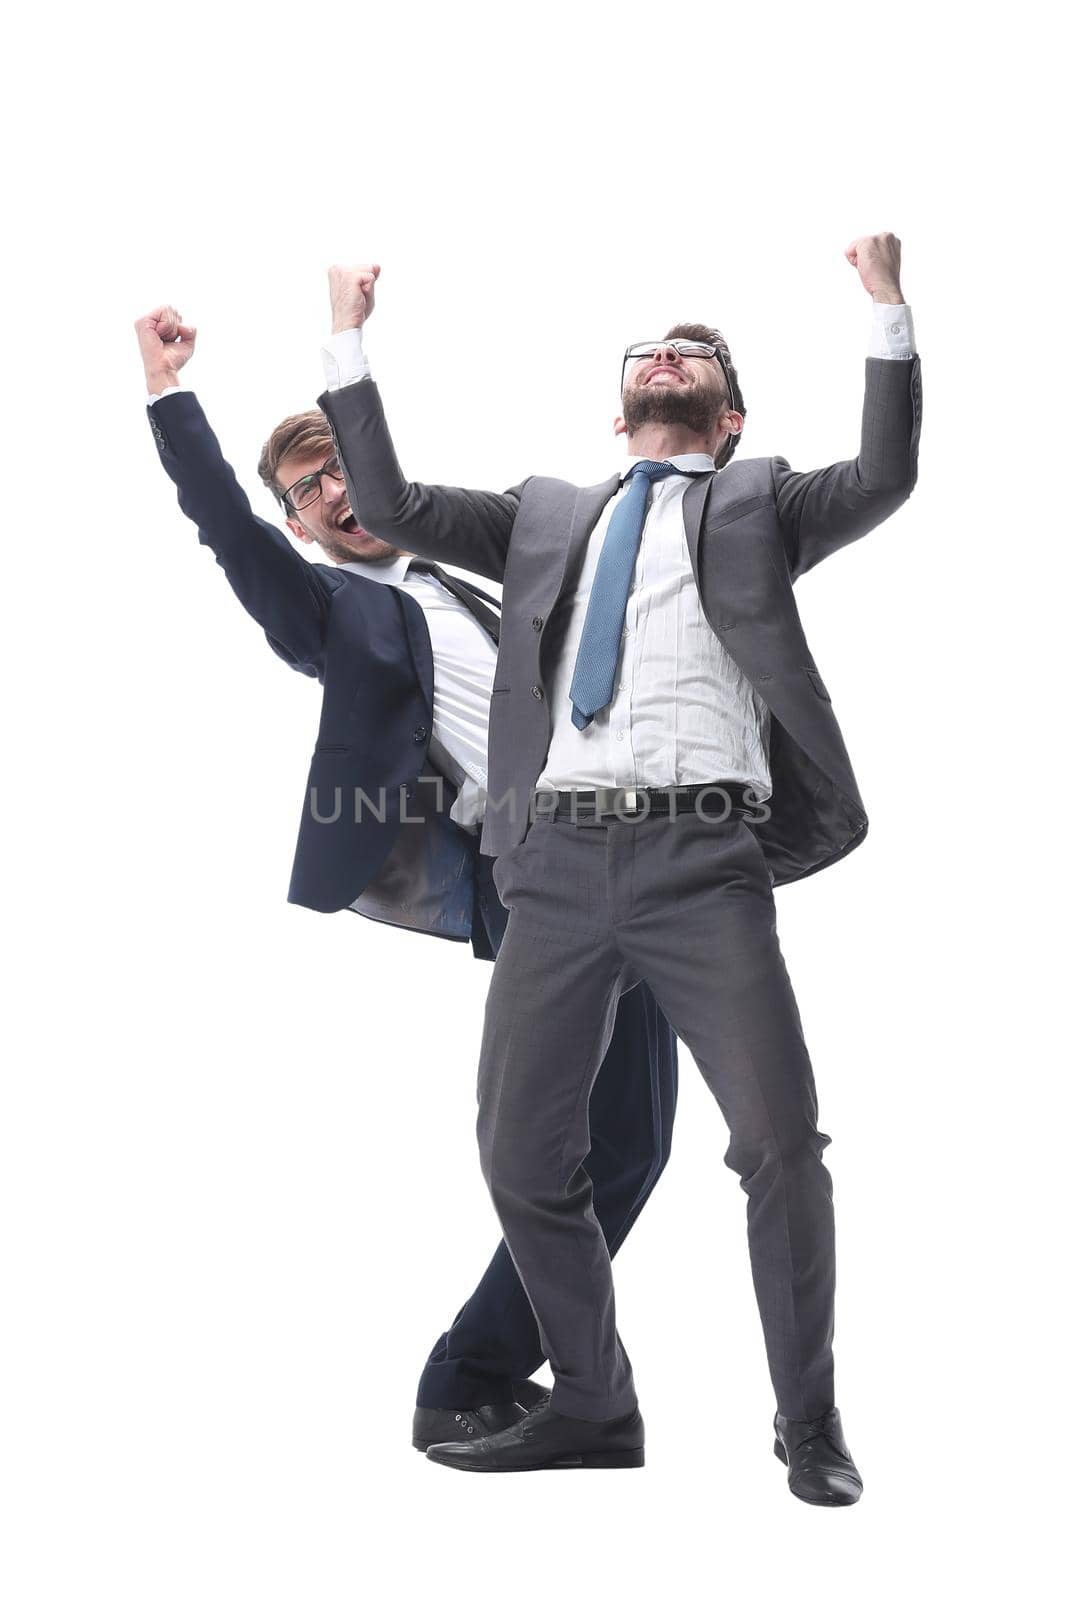 in full growth. two very happy young businessmen . isolated on white background.